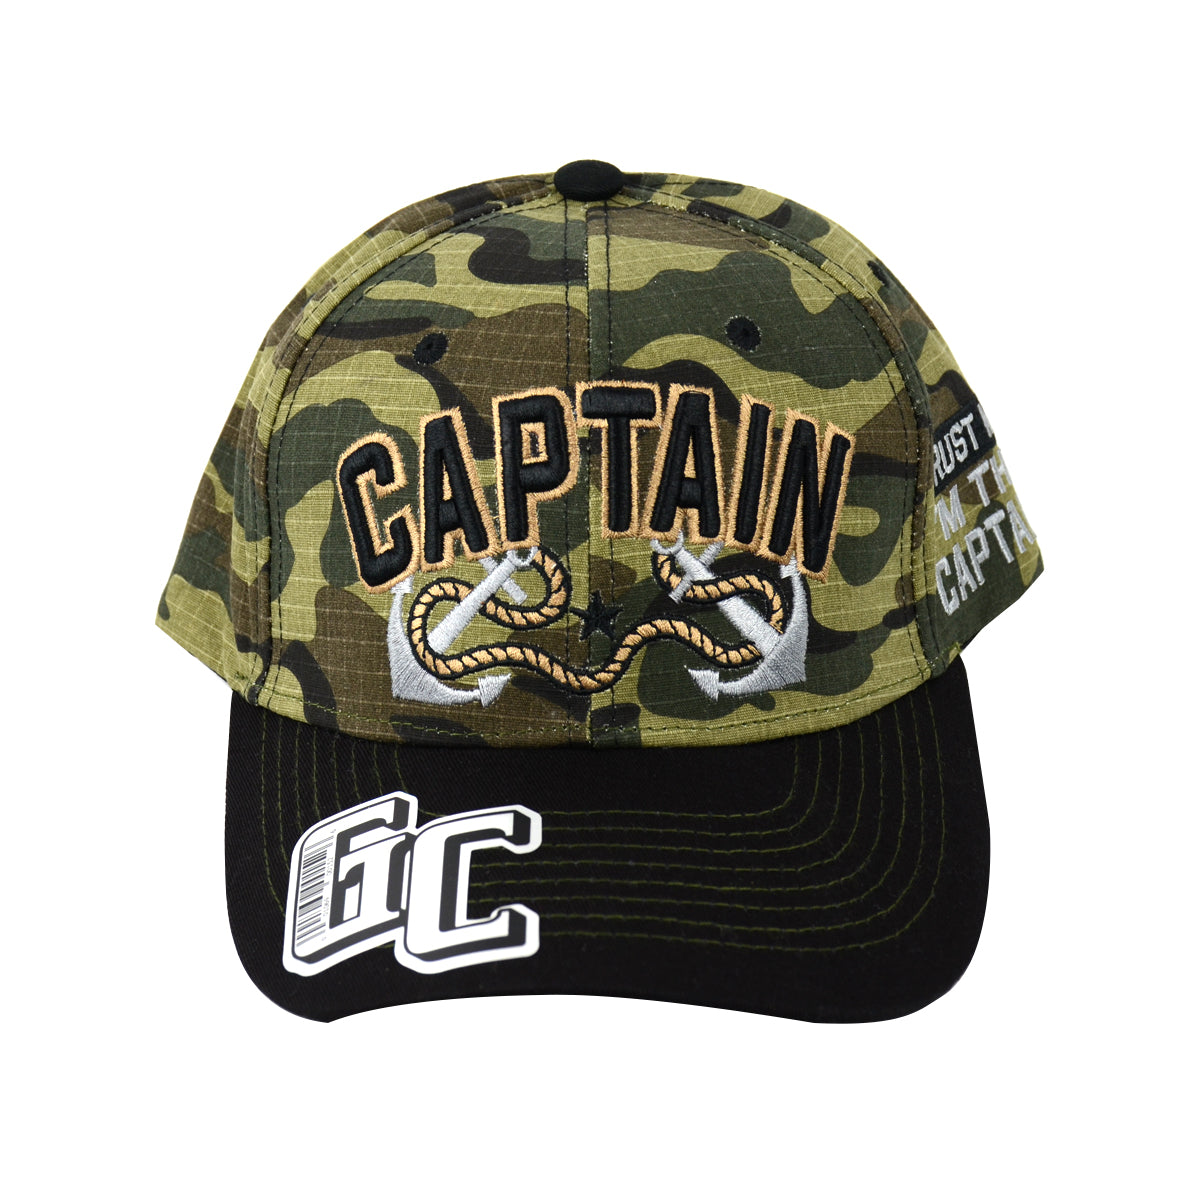 Snapback "Captain" Hat Embroidered